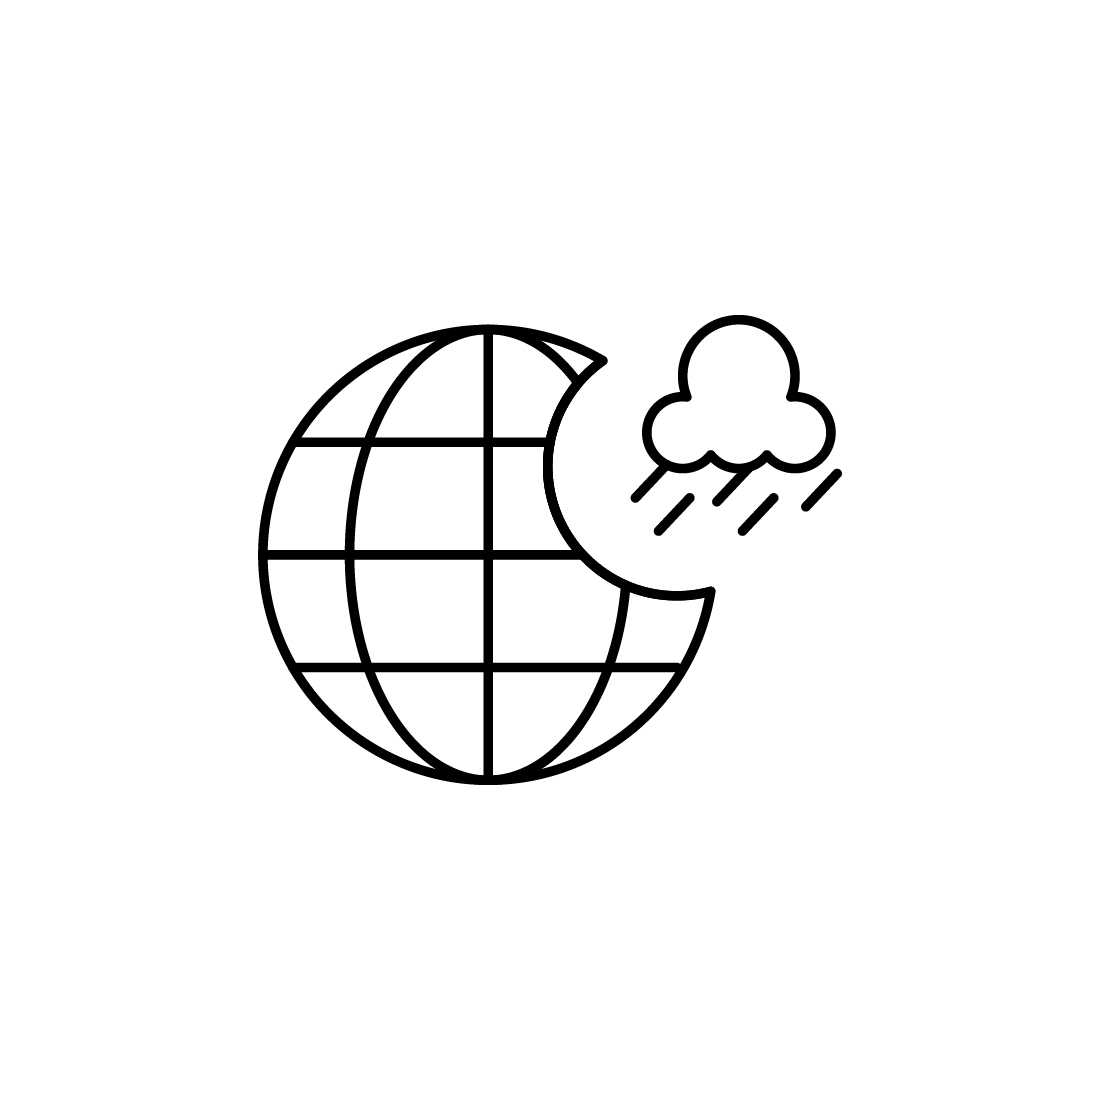 Black and white image of a weather icon.